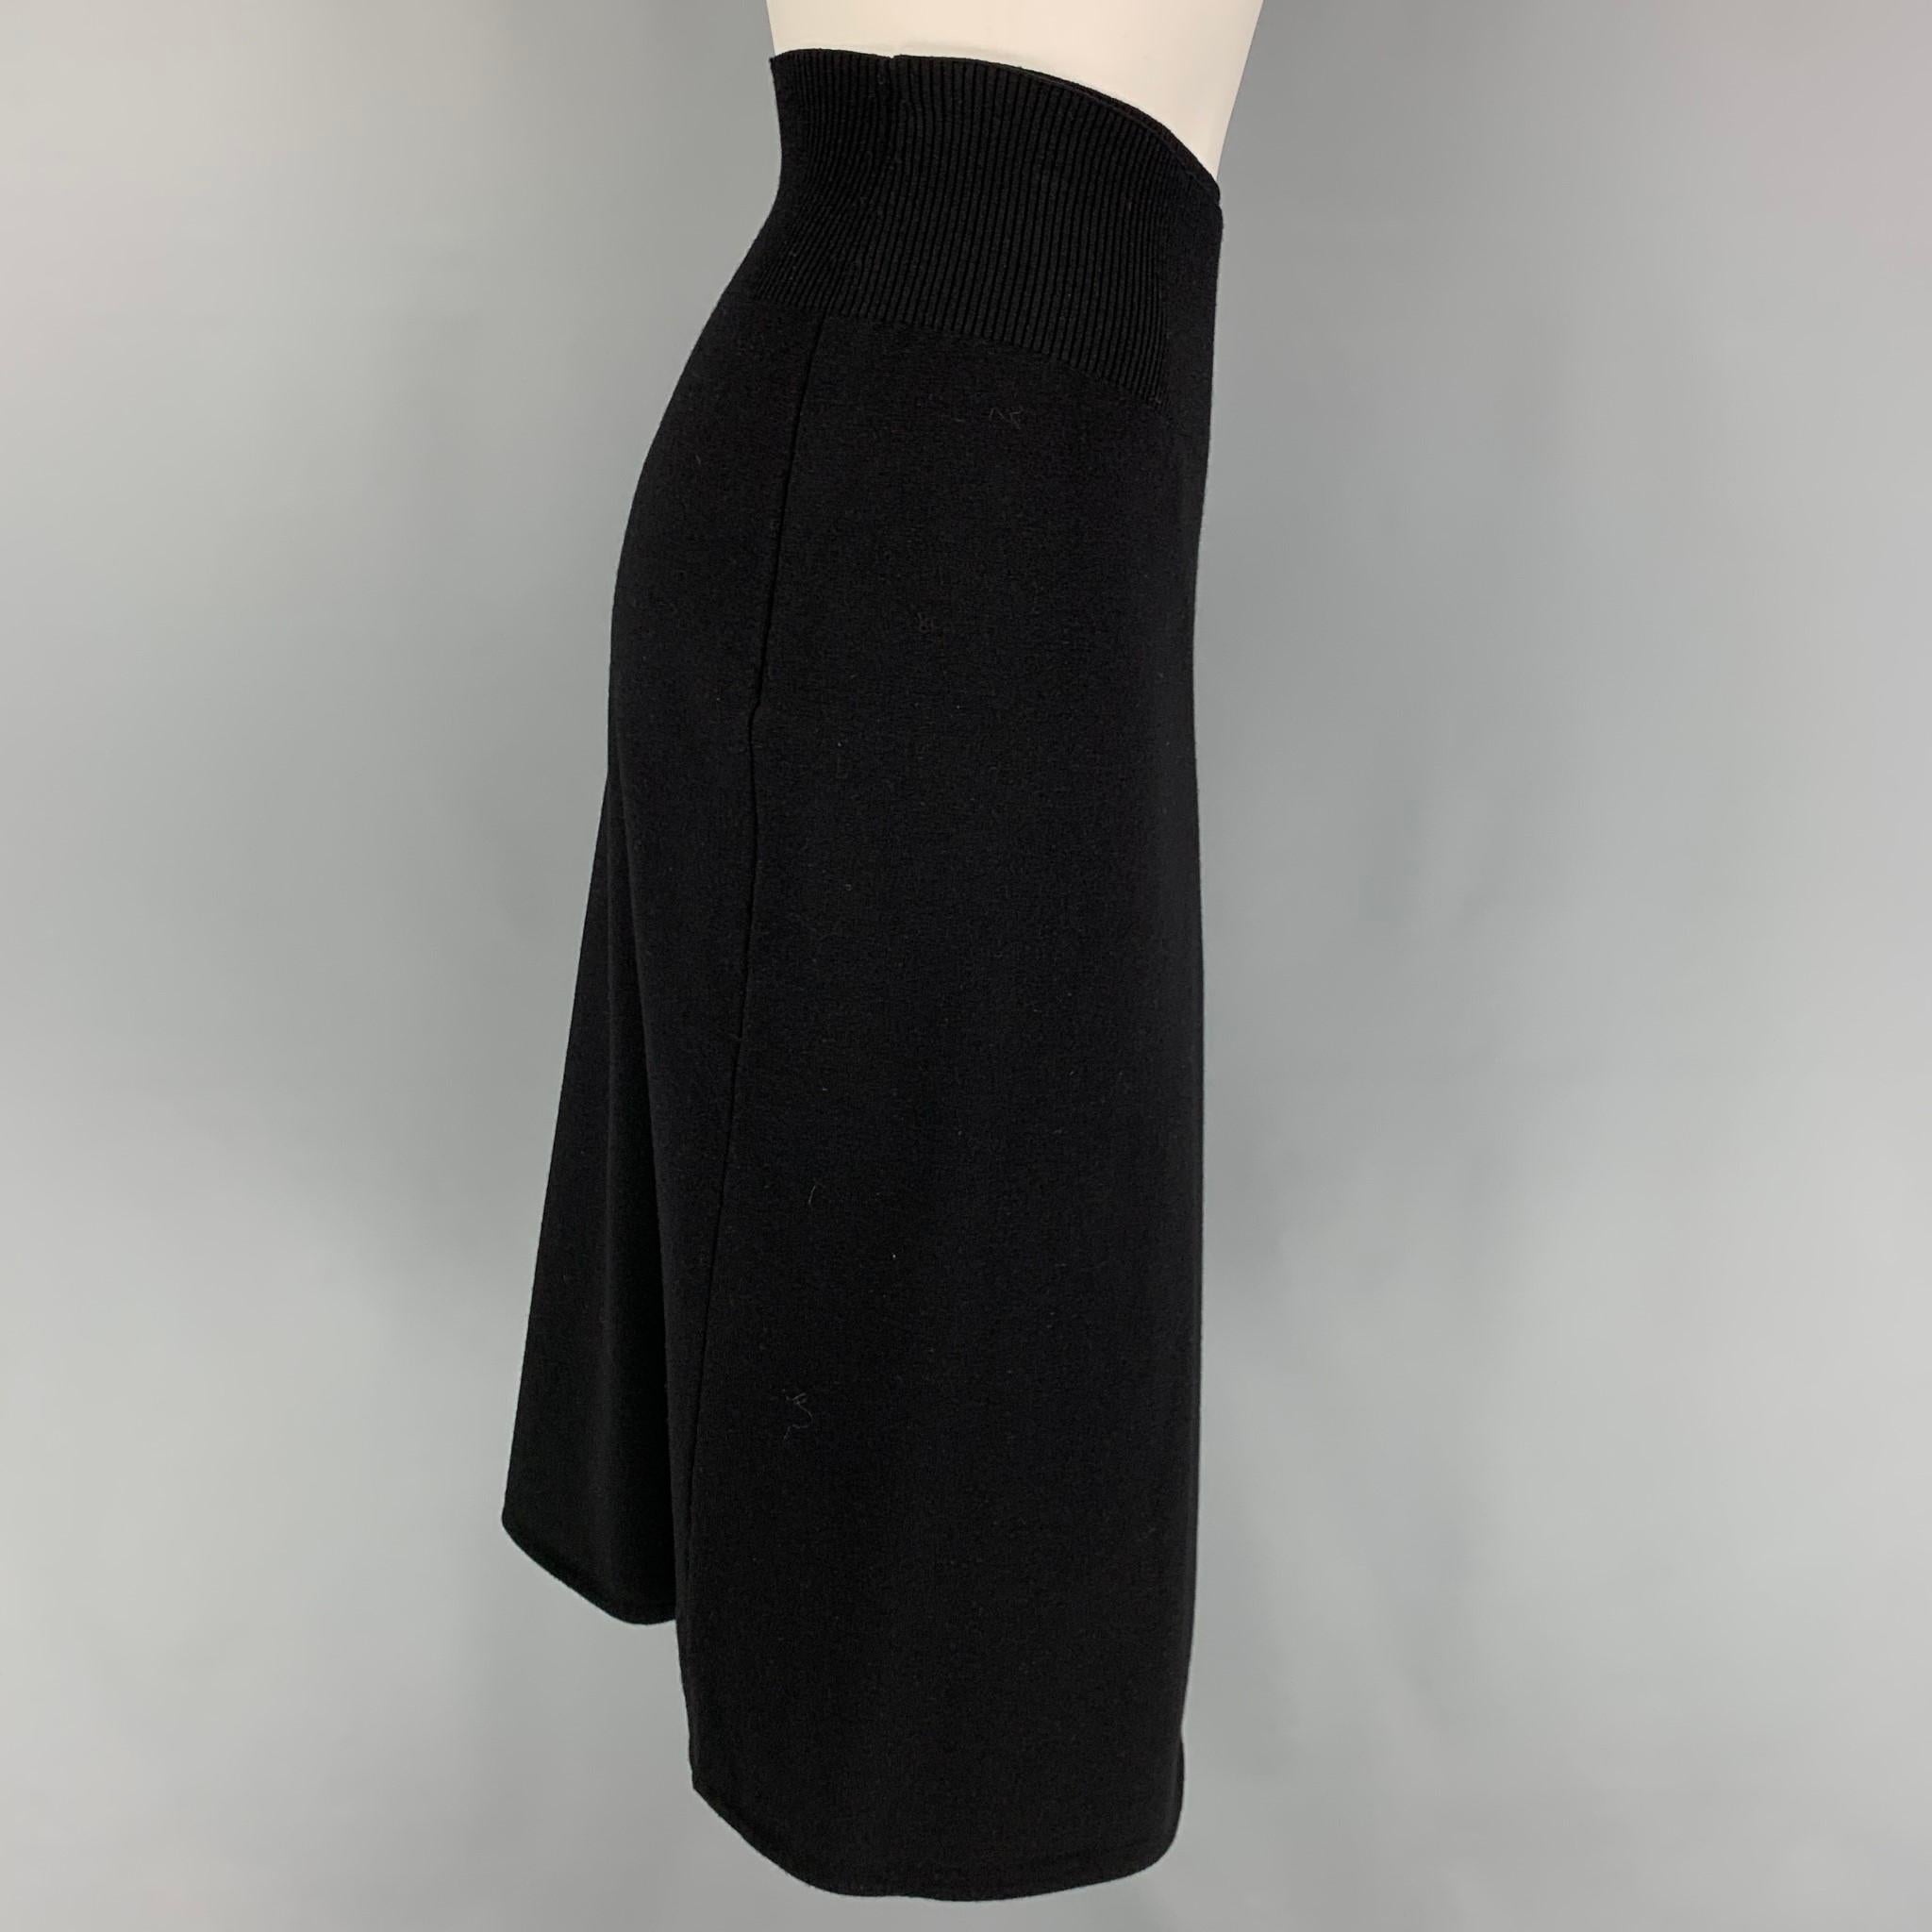 HELMUT LANG skirt comes in a black wool featuring a self tie belt detail, elastic waistband, and a open front. 

New With Tags. 
Marked: L
Original Retail Price: $495.00

Measurements:

Waist: 30 in.
Hip: 38 in.
Length: 26 in. 